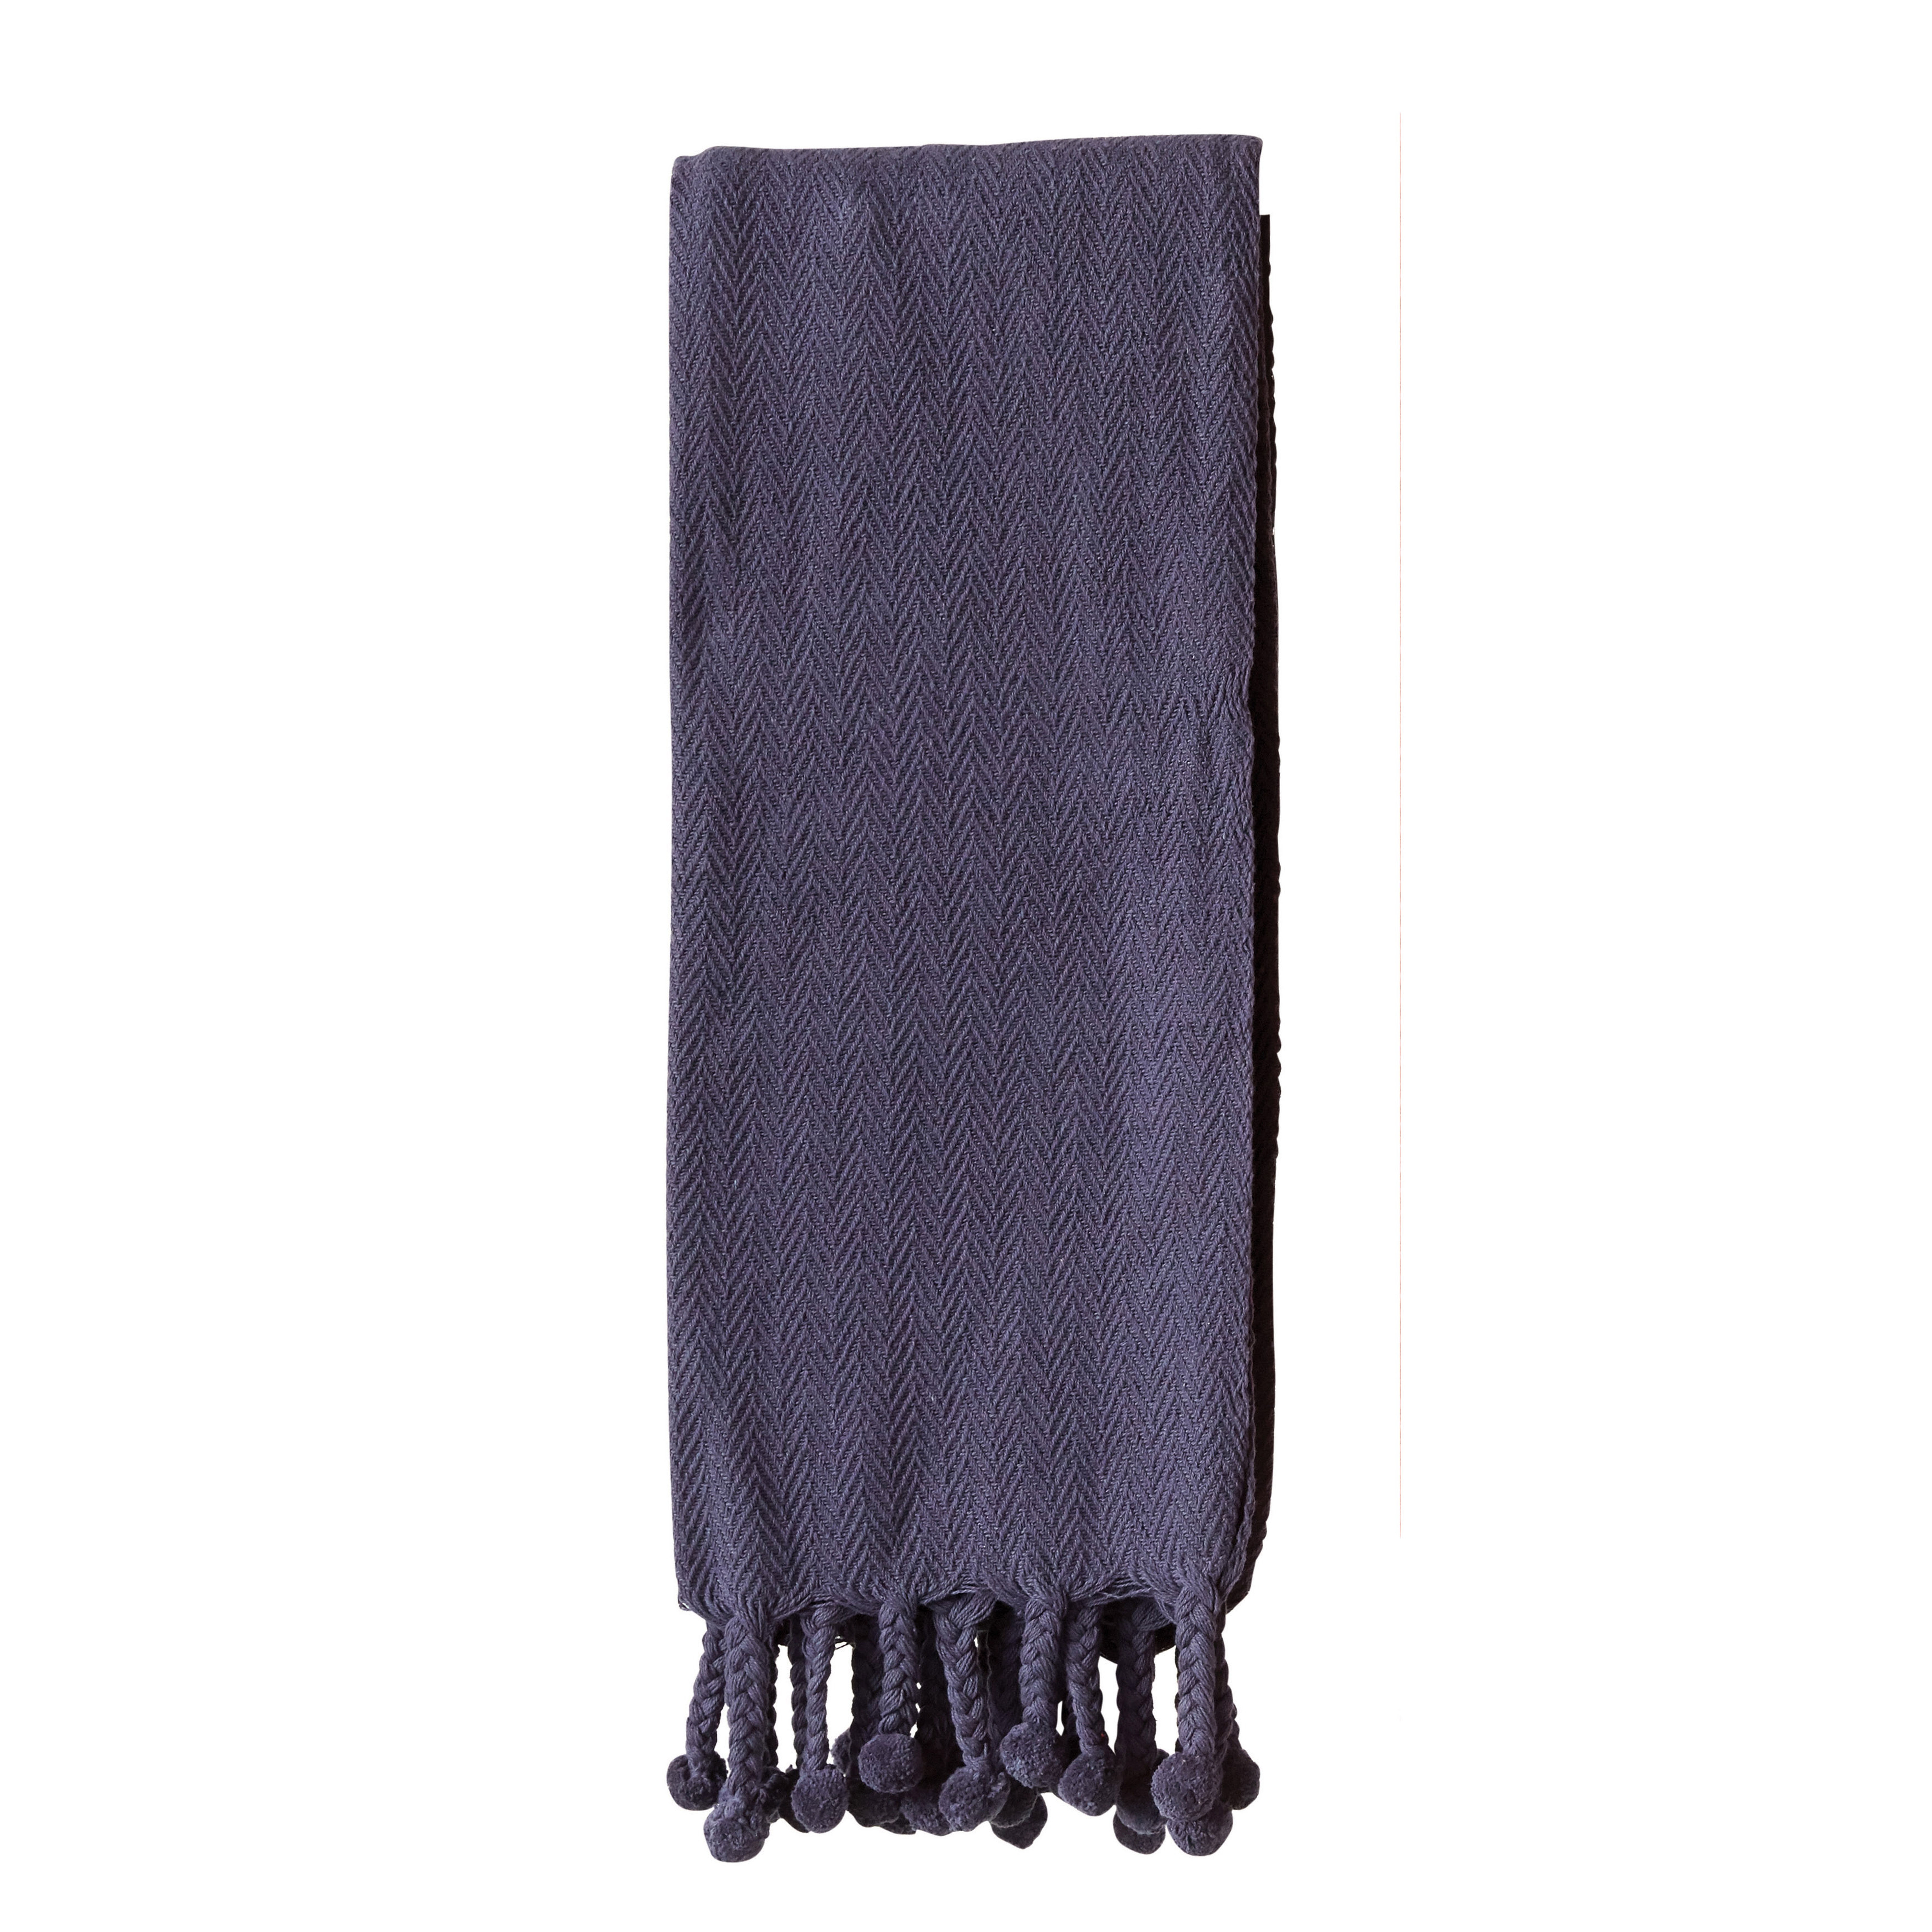 Navy Cotton Throw with Pom Poms - Nomad Home